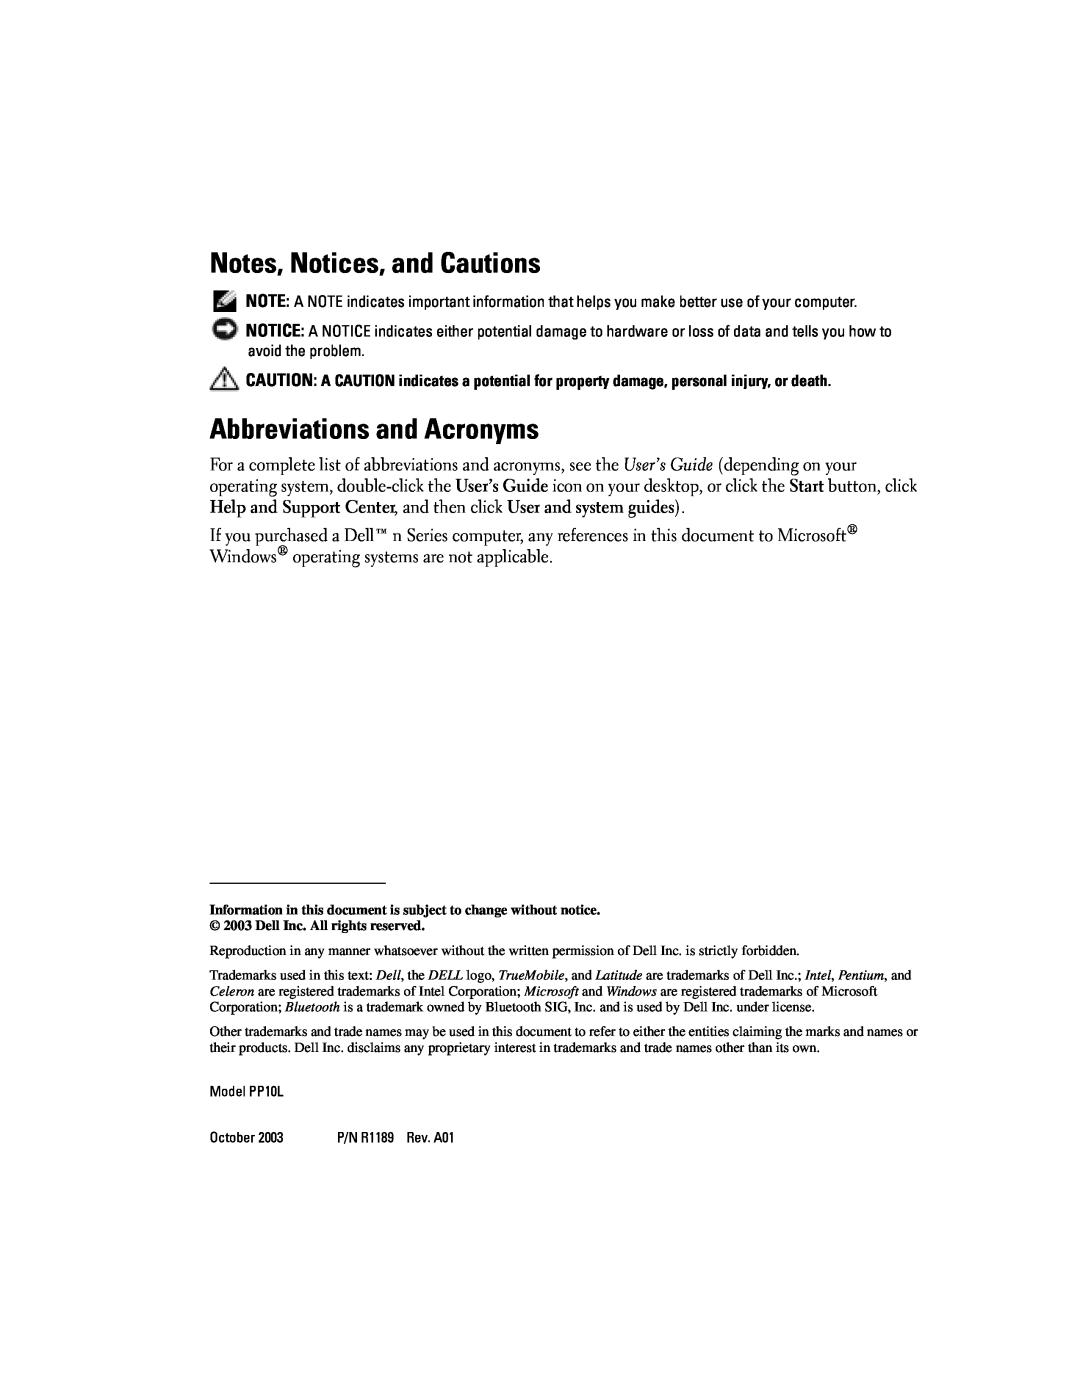 Dell D505 manual Notes, Notices, and Cautions, Abbreviations and Acronyms, Model PP10L, October 